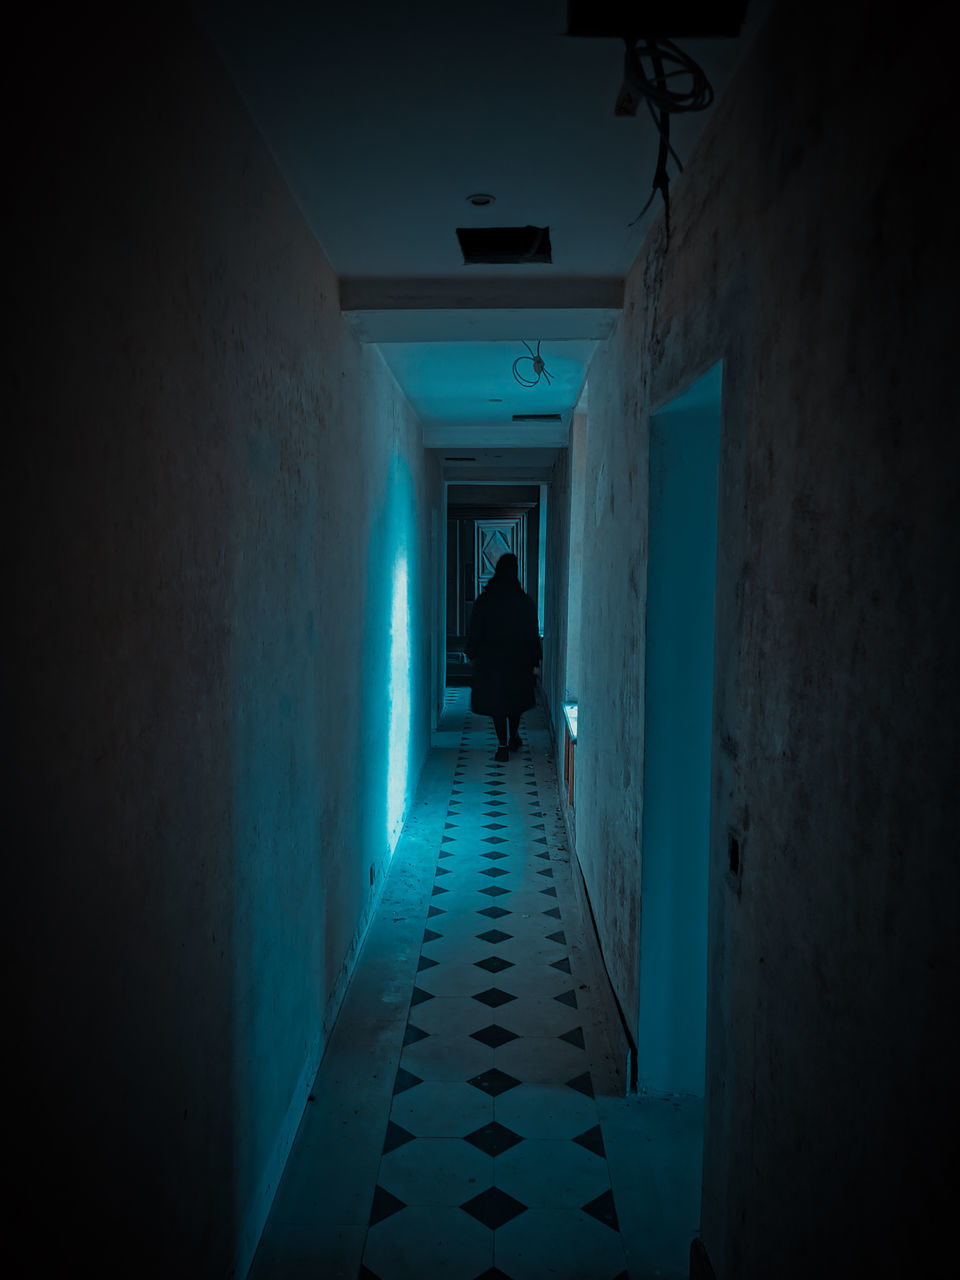 darkness, light, blue, architecture, corridor, arcade, indoors, one person, dark, tunnel, built structure, night, wall - building feature, building, full length, spooky, adult, silhouette, lighting equipment, illuminated, horror, fear, the way forward, walking, snapshot, shadow, men, mystery, screenshot, rear view